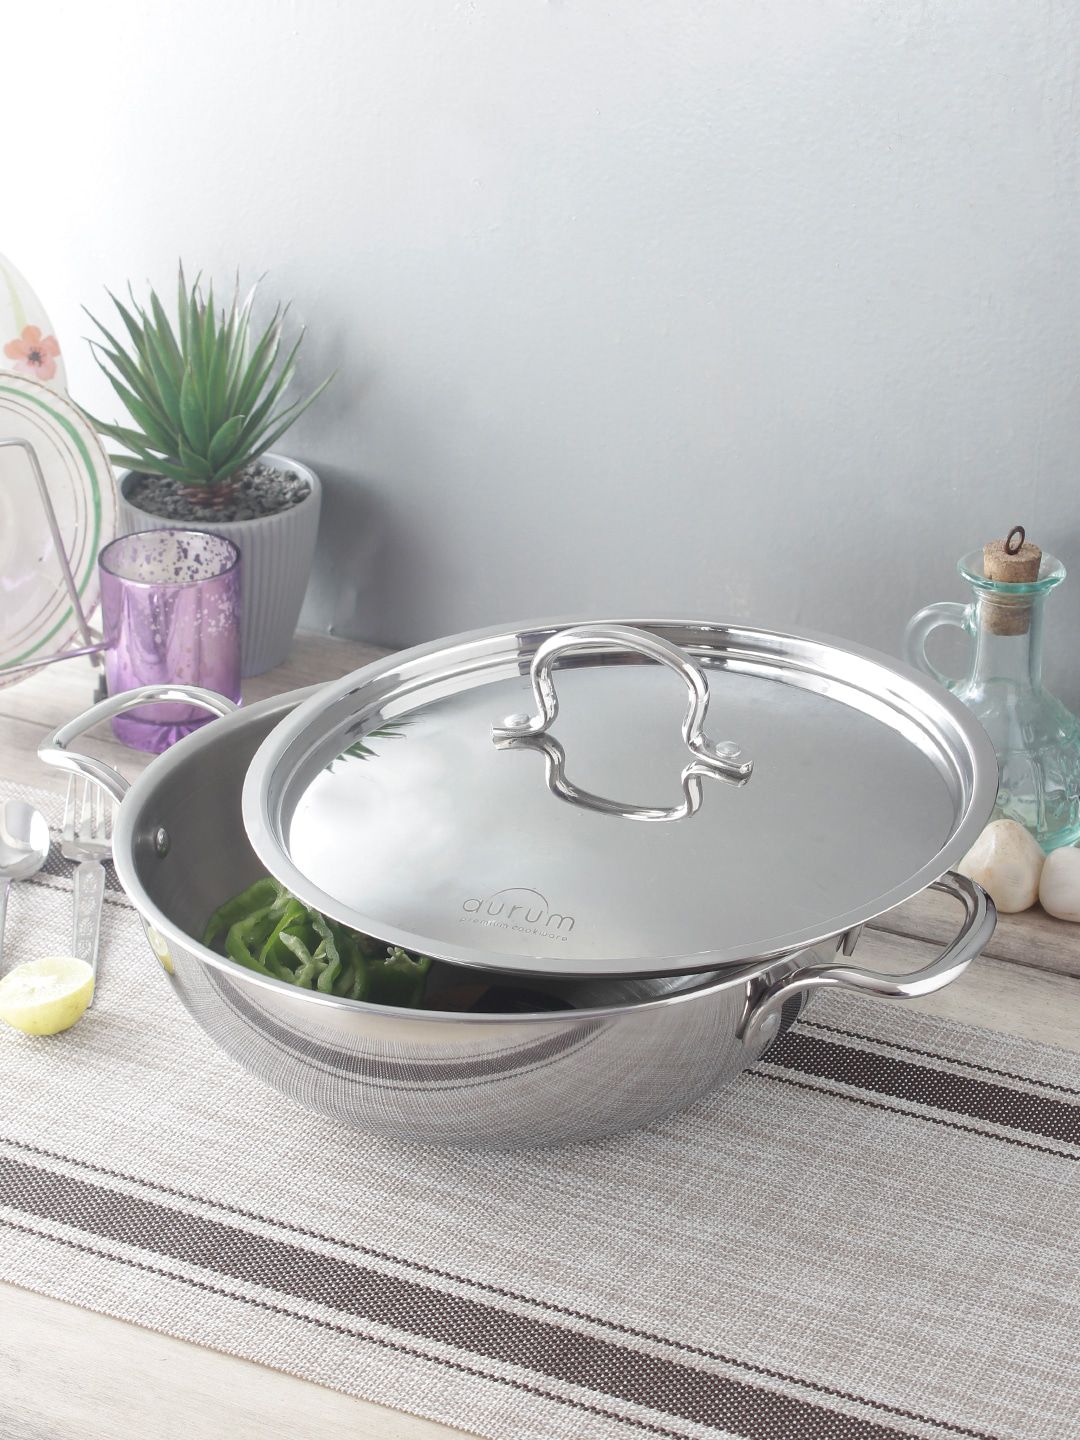 AURUM Silver-Toned Triply Kadai with Stainless Steel Lid 3.6 Litre Price in India